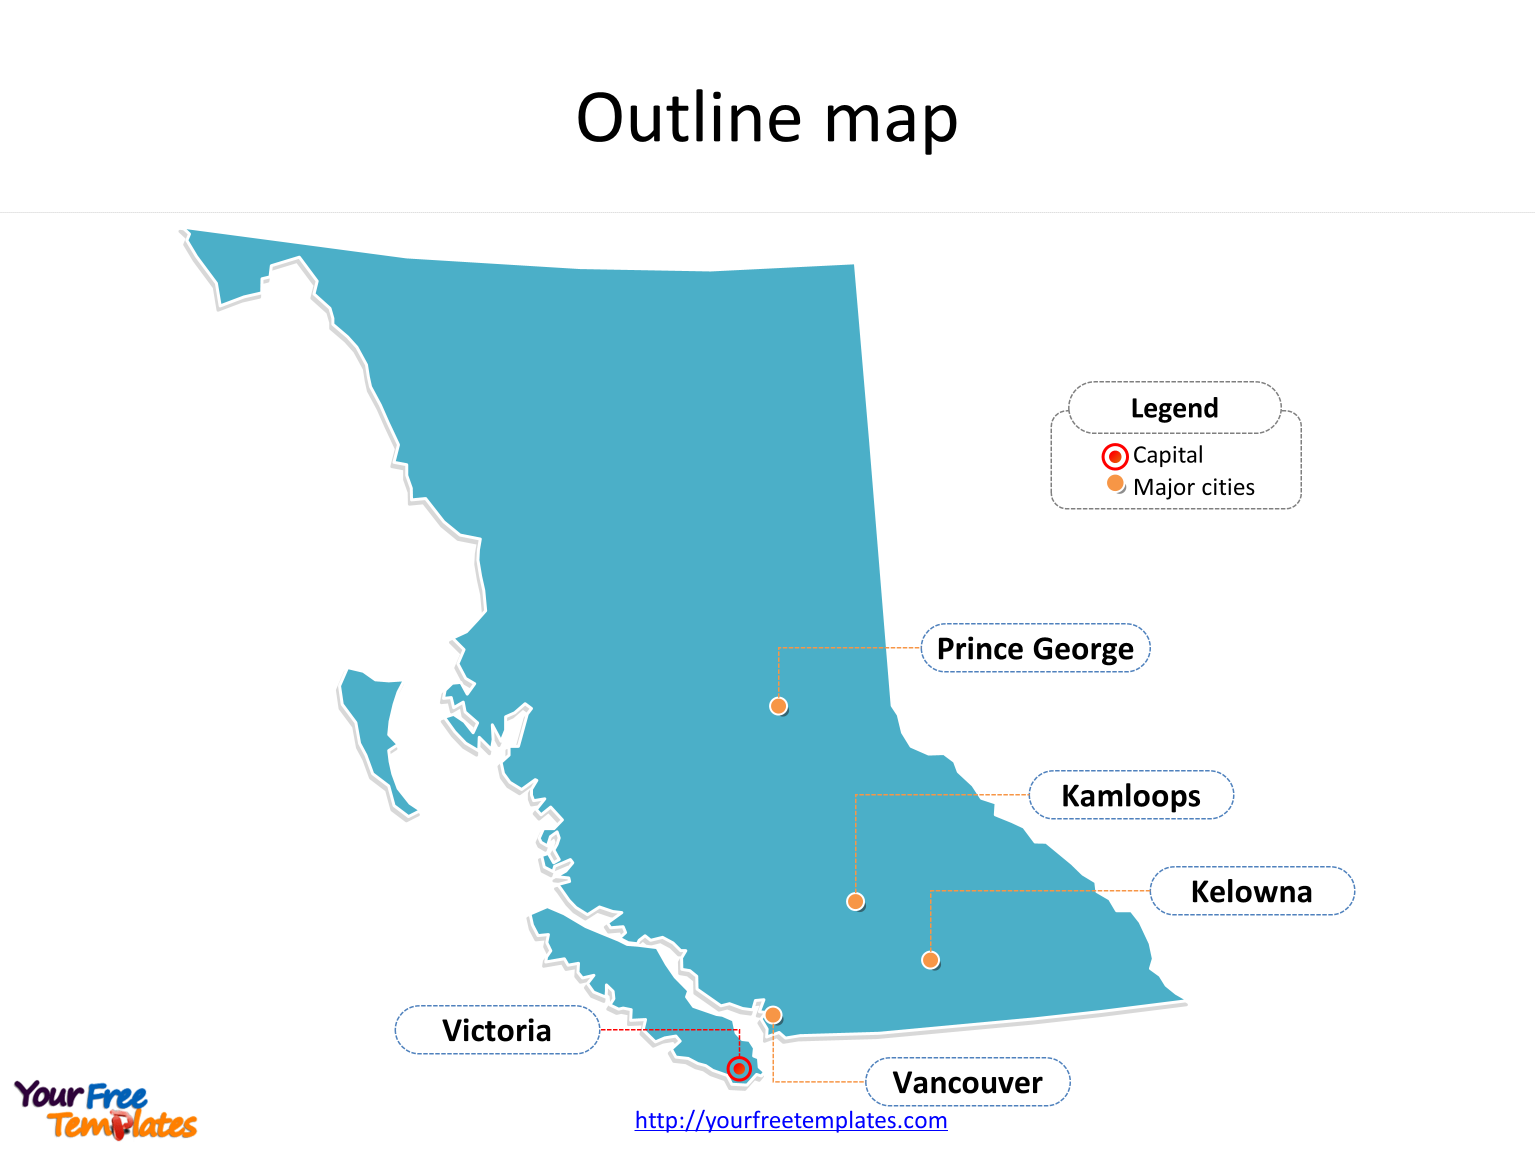 Province of British Columbia map with outline and cities labeled on the British Columbia maps PowerPoint templates